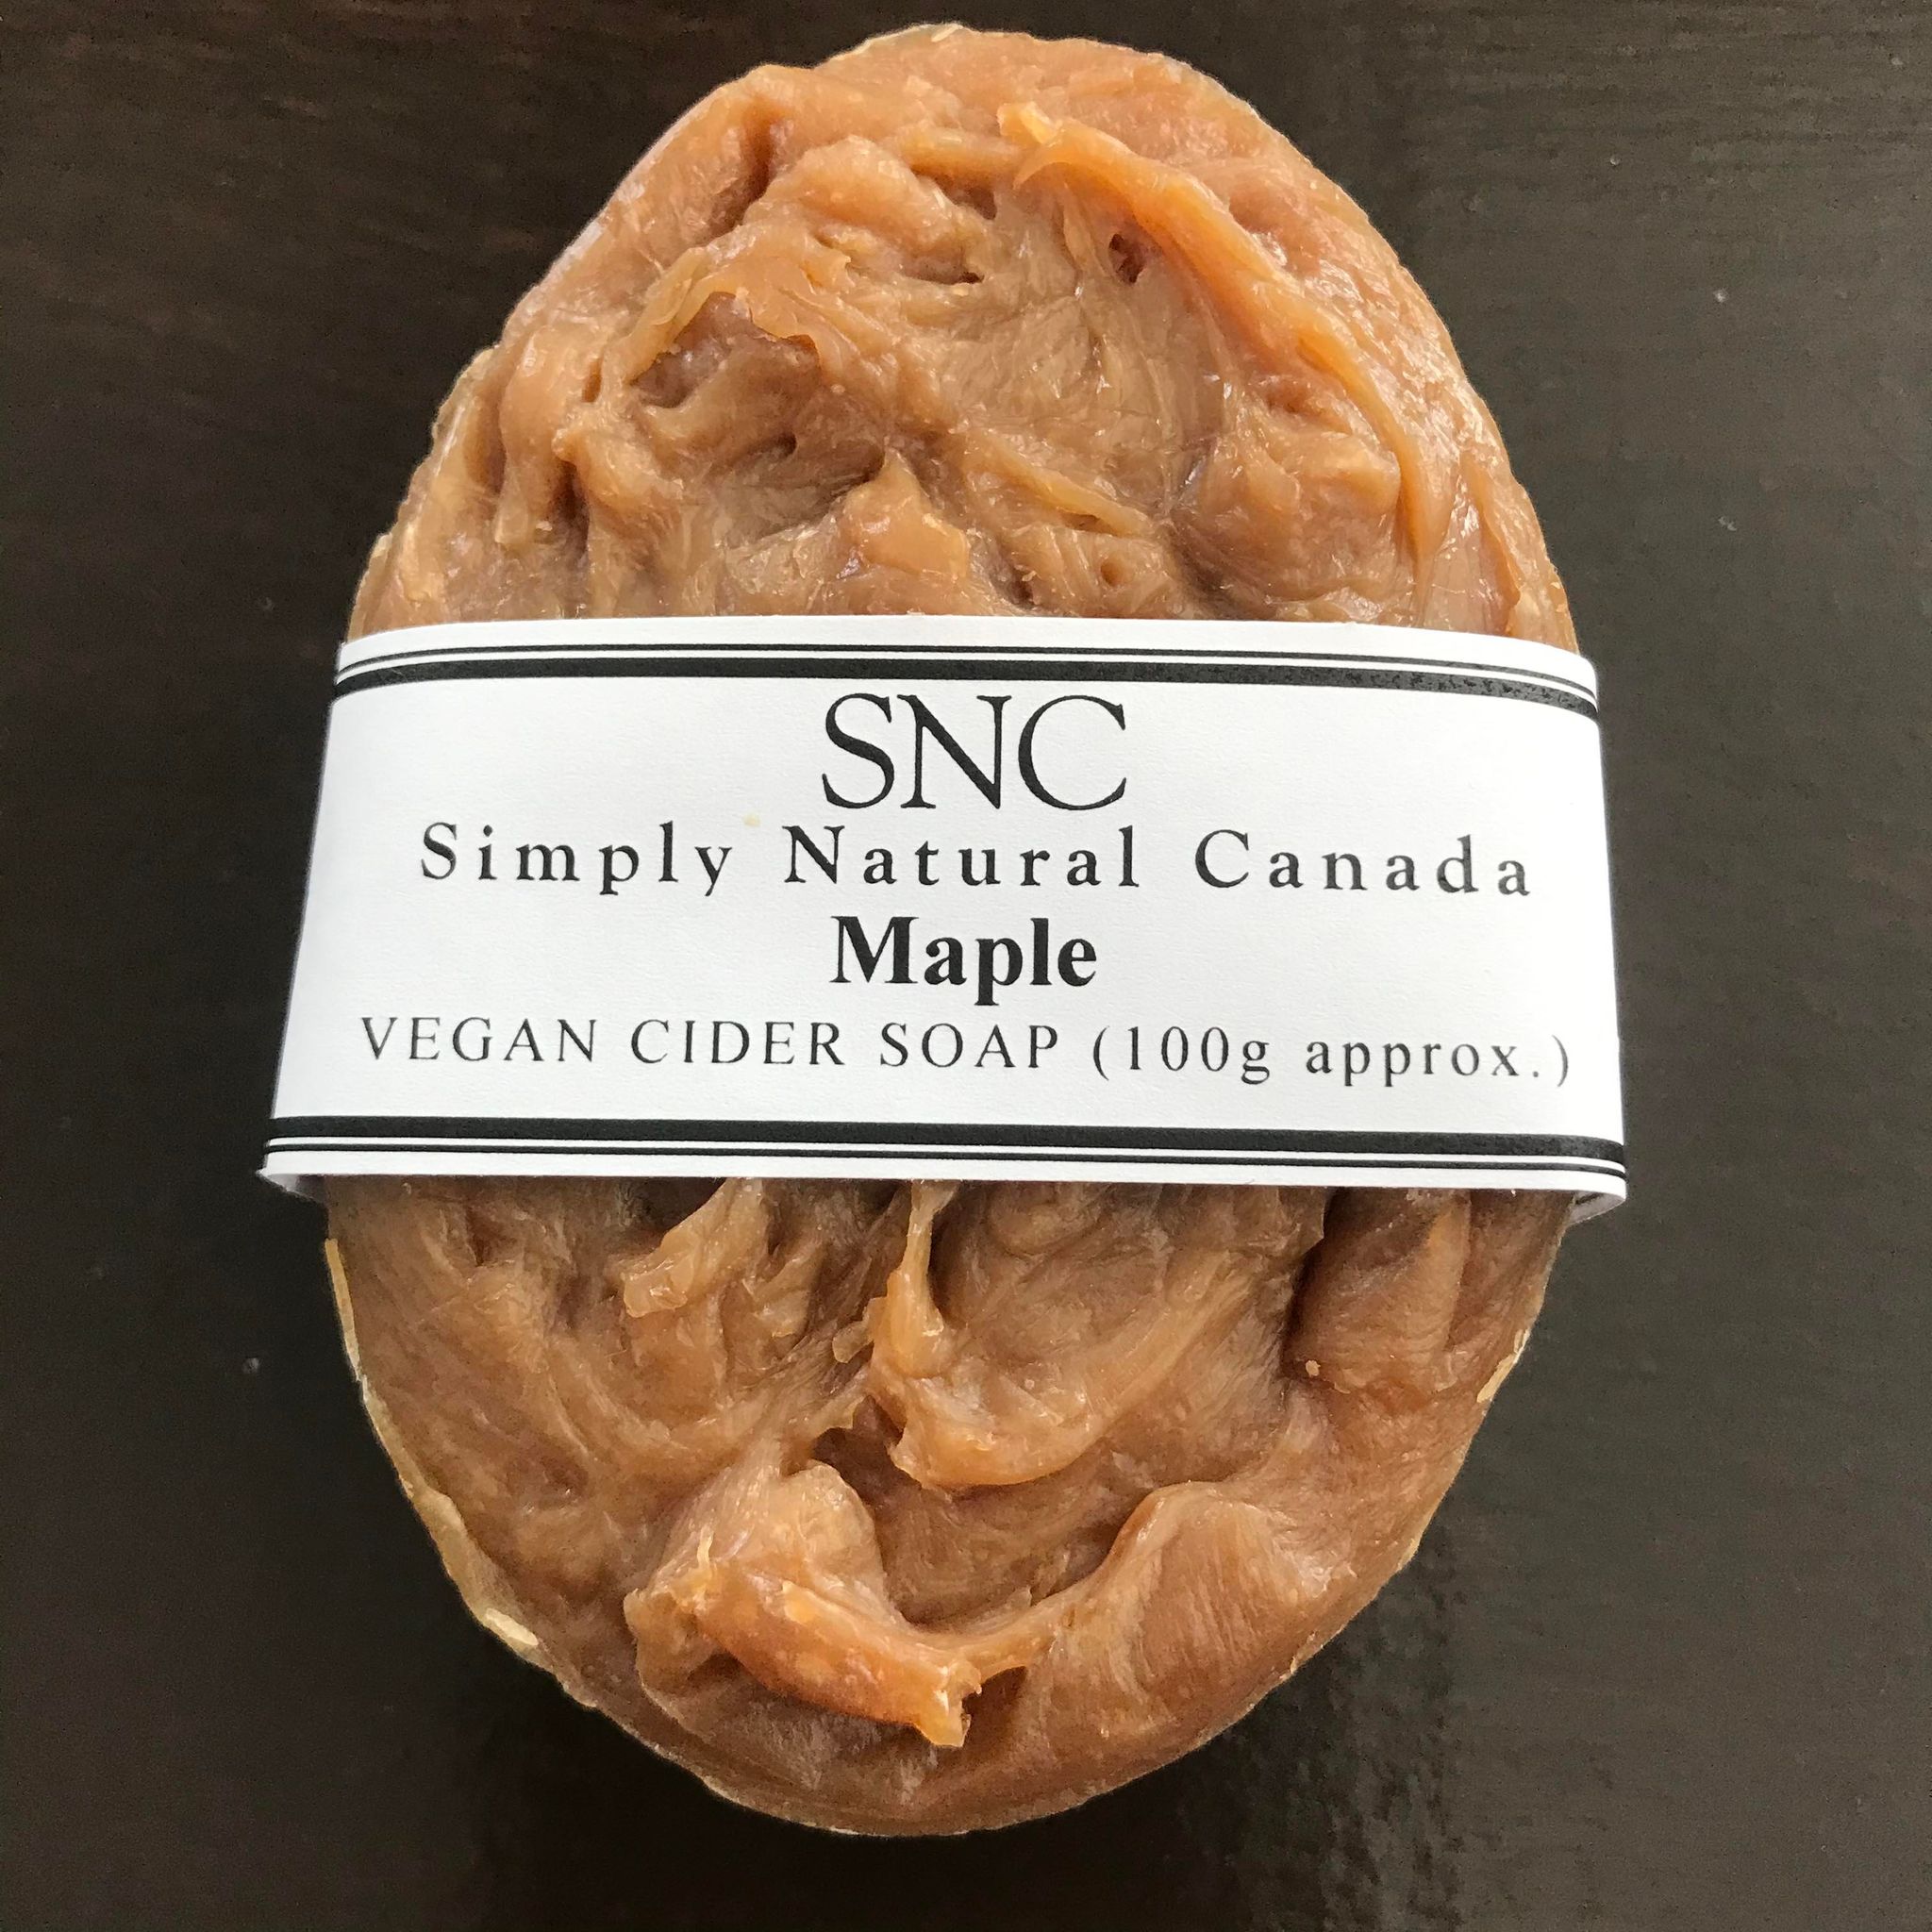 simply natural canada small batch dark oval  artisan vegan maple cider soap made in canada with local cider